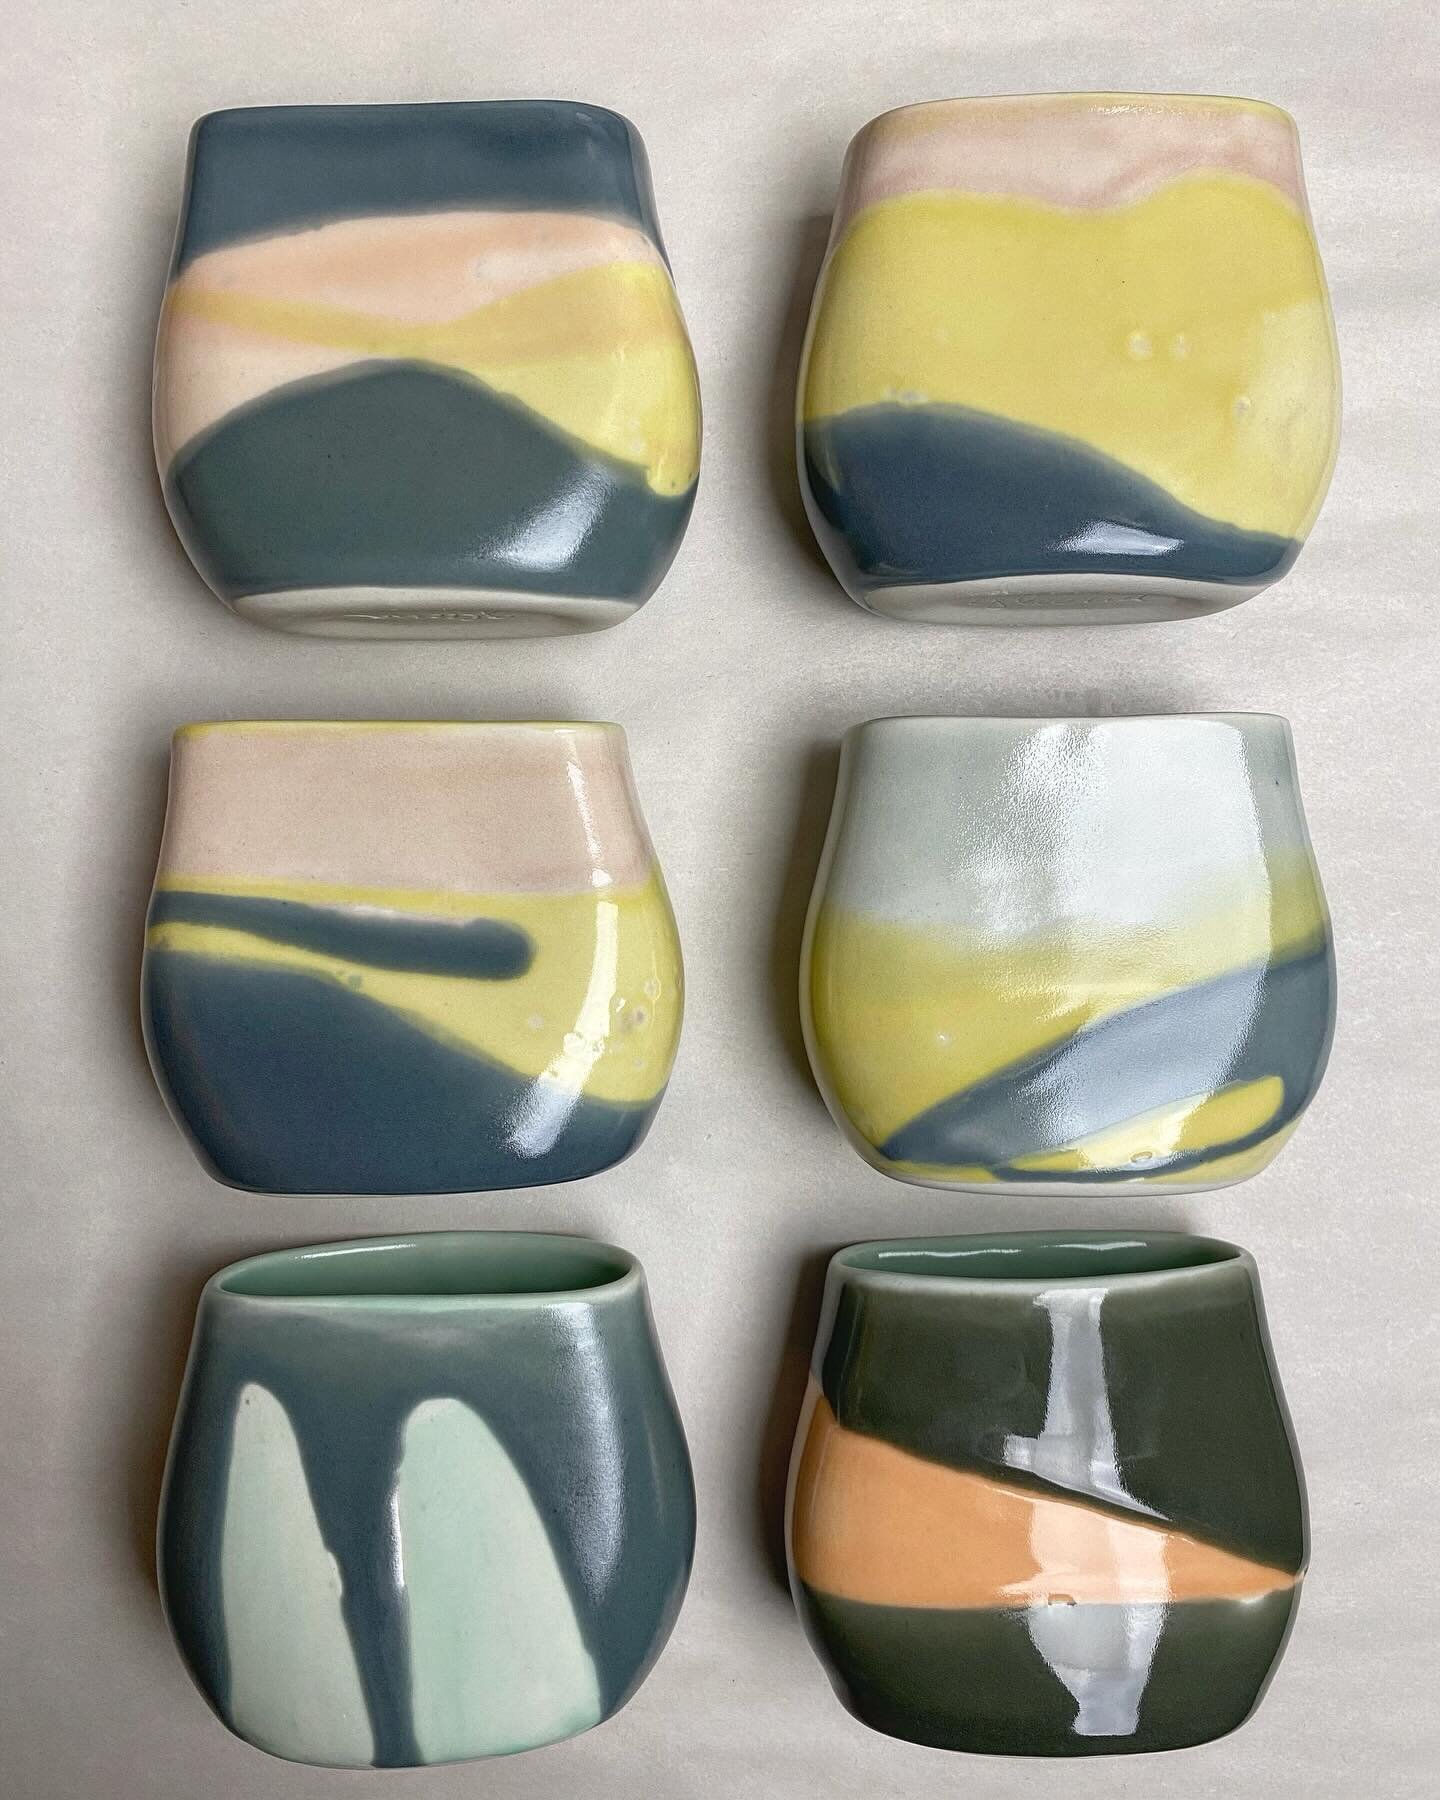 practicing non-attachment to outcome by continuing to explore layers of glaze. what do you see? #gleenaporcelain #handmade #explore #porcelain #glaze